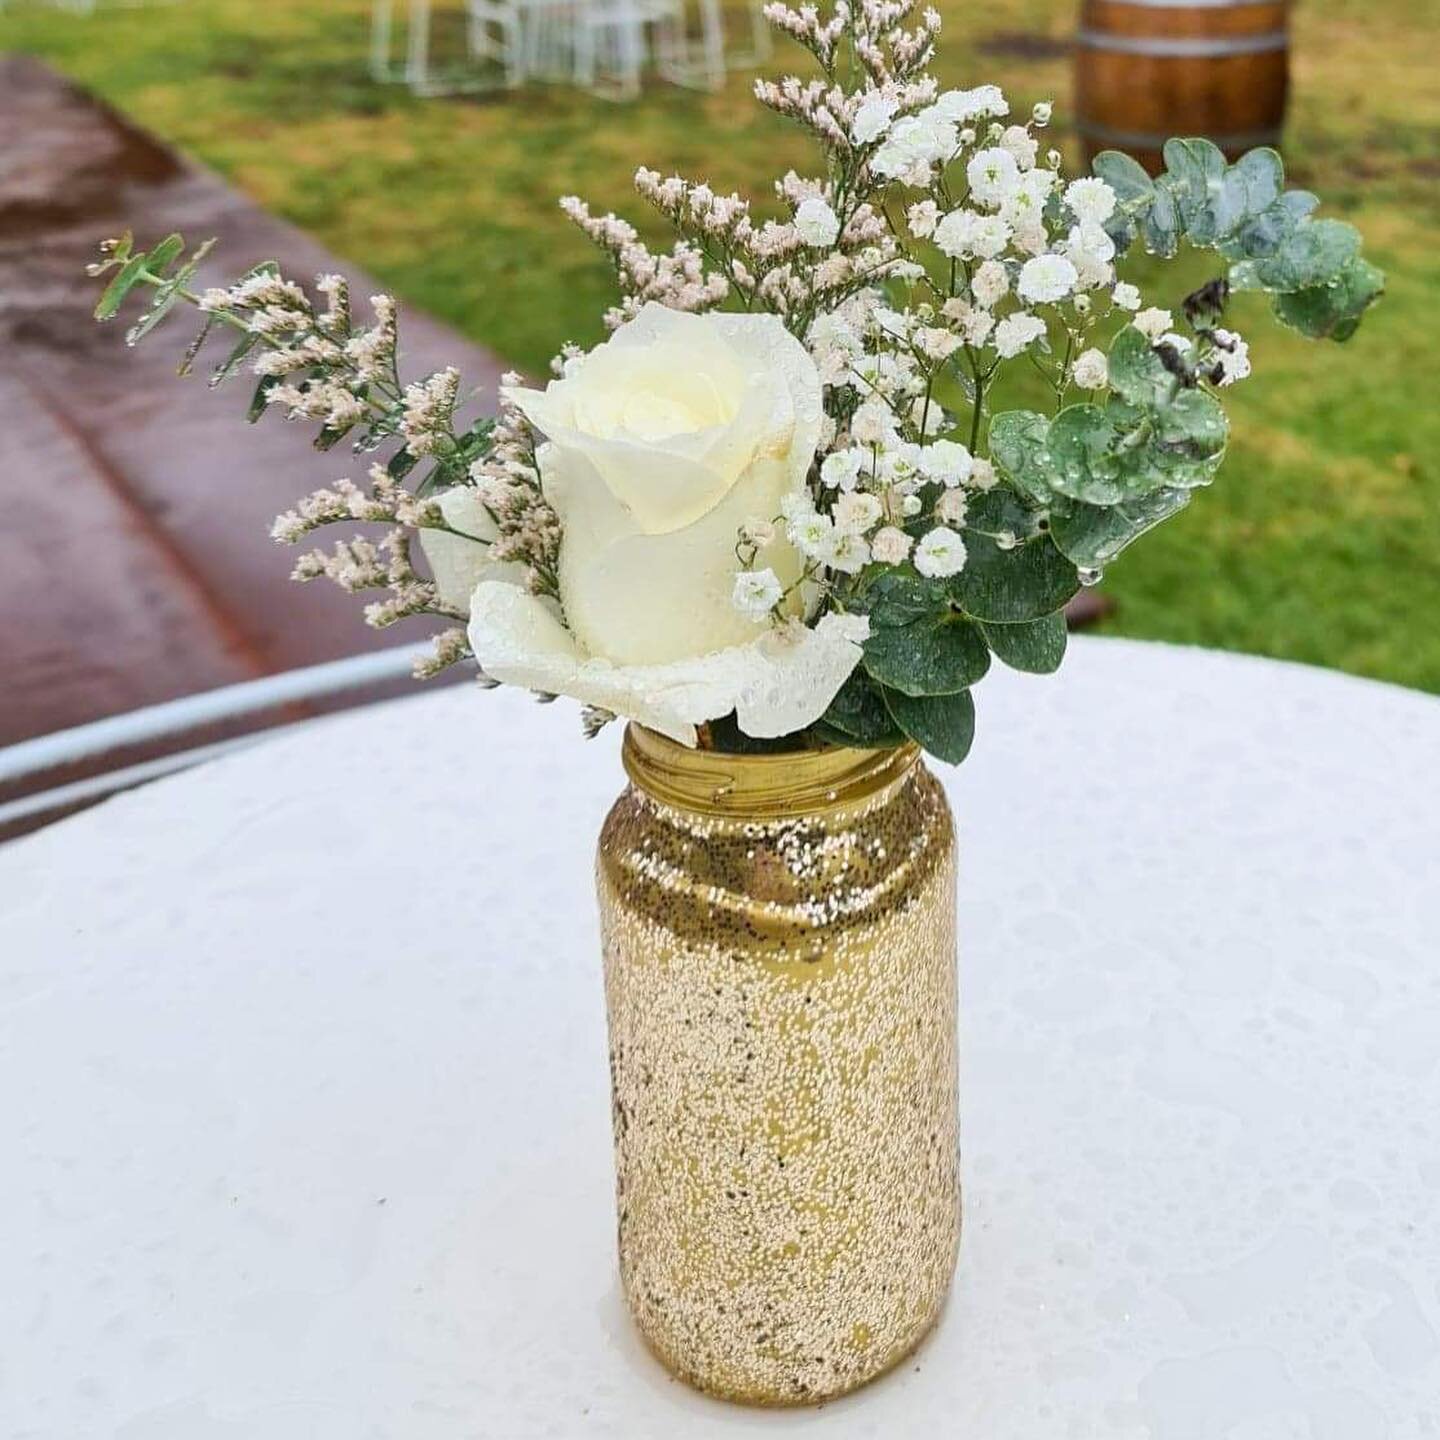 Loving these florals we pieced together in our gold glitter vases for an engagement party a few weeks ago &lsquo;simple but stunning&rsquo; #eventflorals #equipmenthire #engagementdecor #weddingflorals #taylormadeweddingsandevents